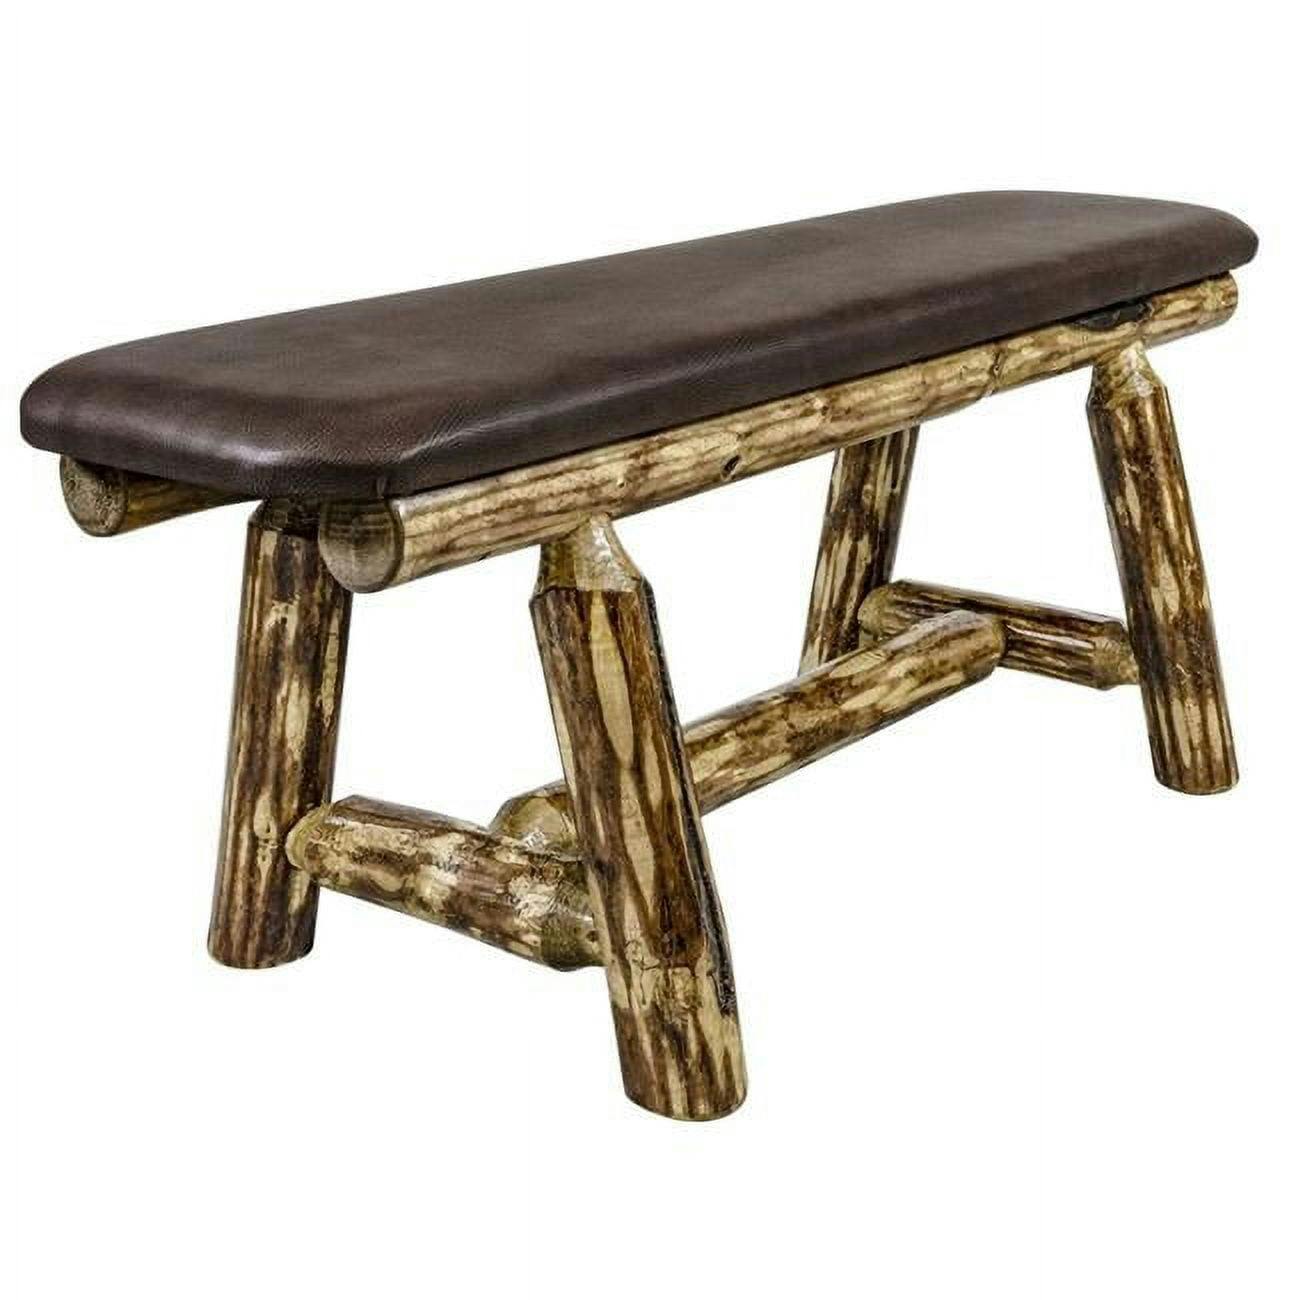 Glacier Country Rustic Plank-Style 45" Bench with Saddle Upholstery